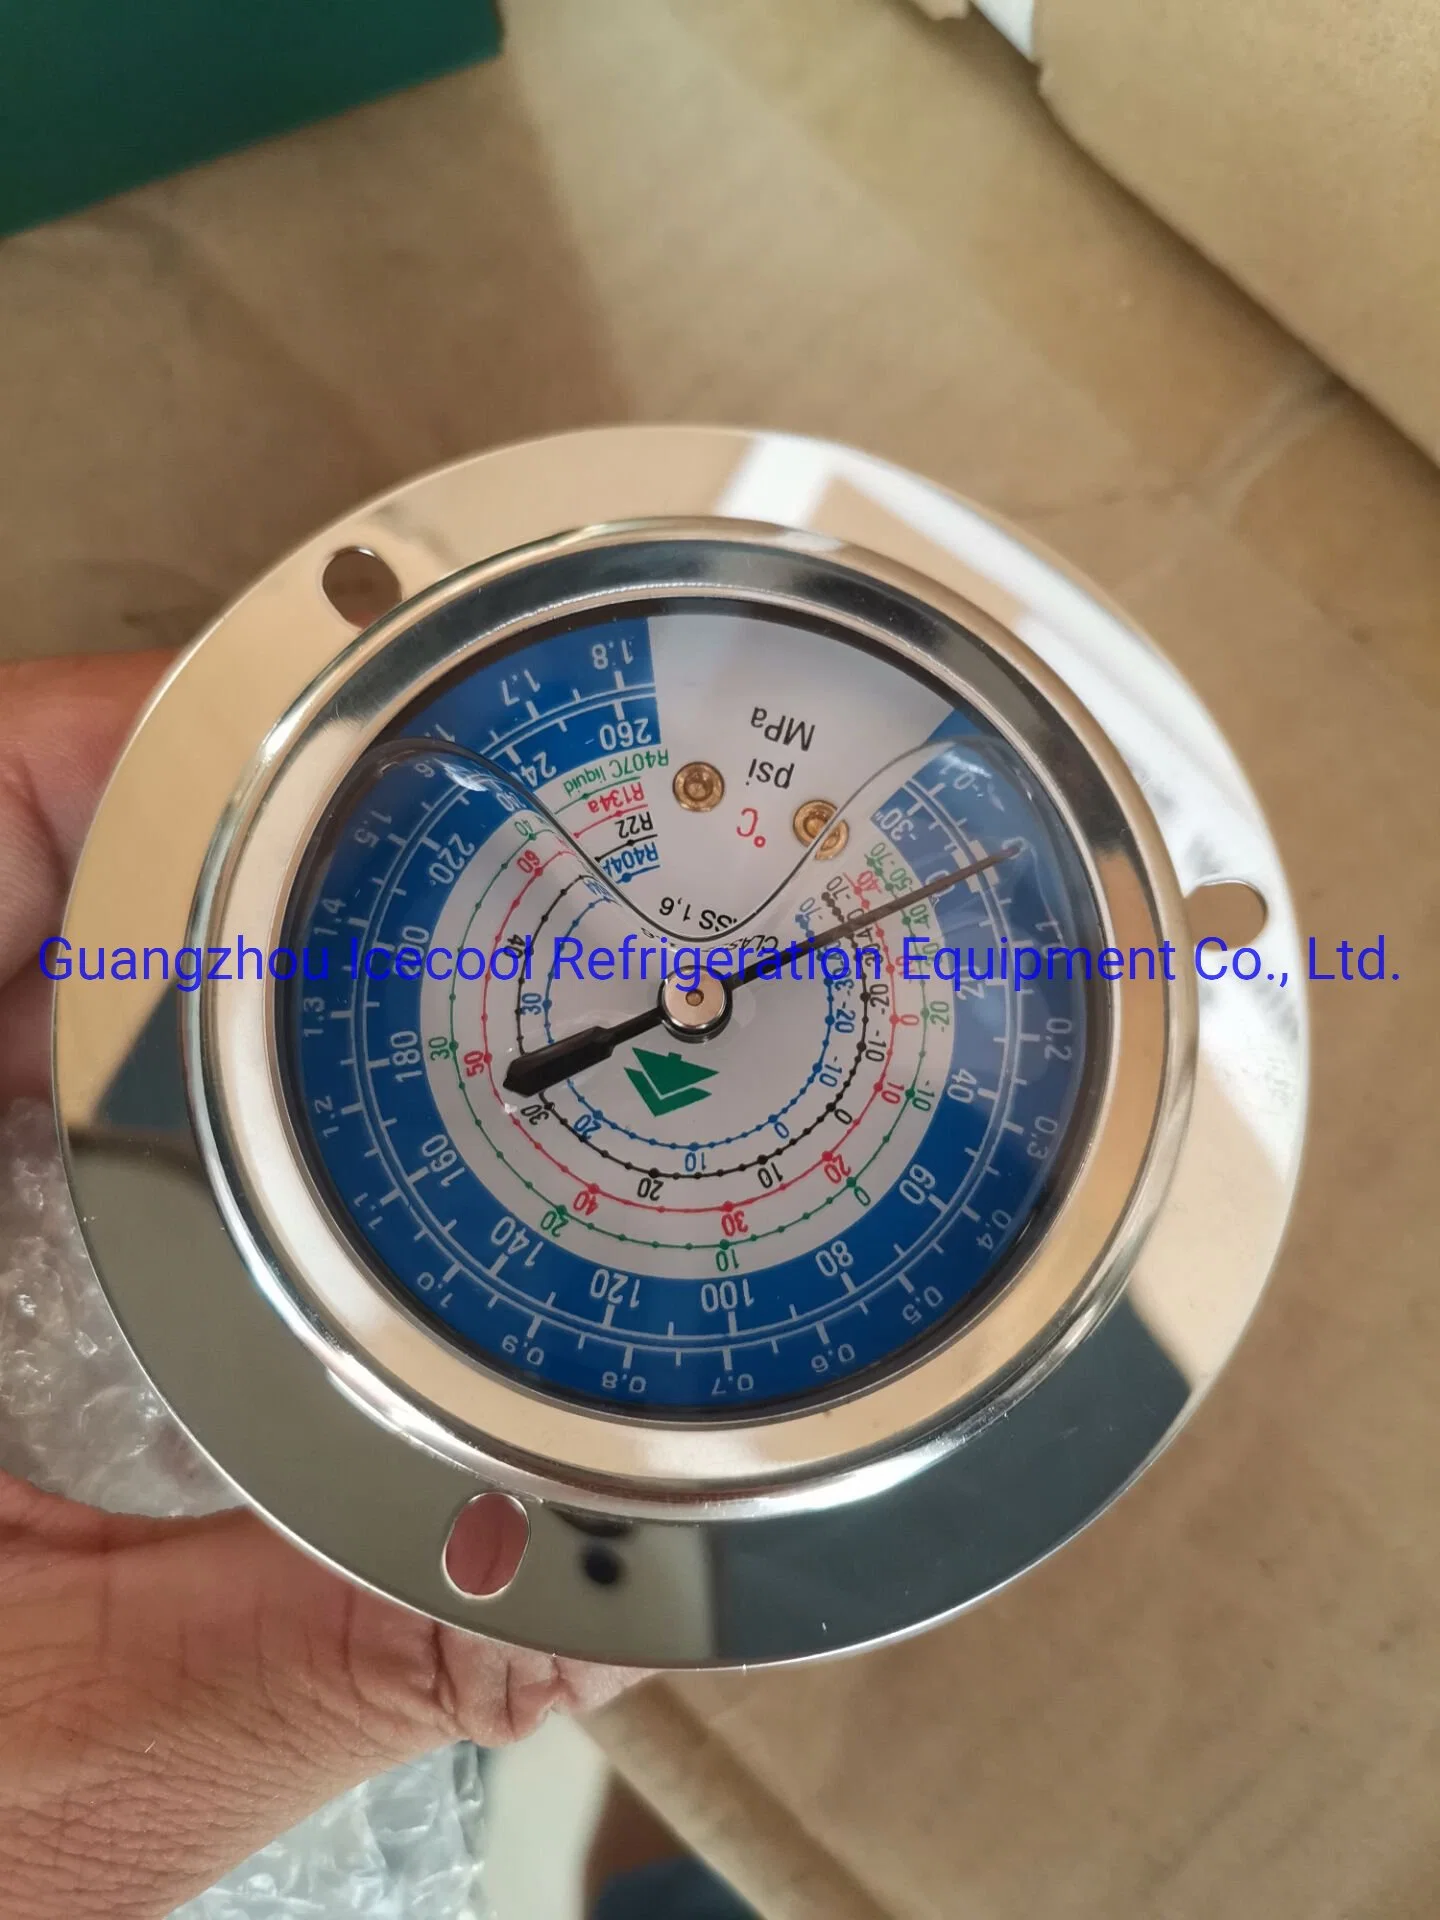 Hongsen Oil Filled Vacuum Pressure Gauge for R22 R134A R404A R407c for High and Low Pressure